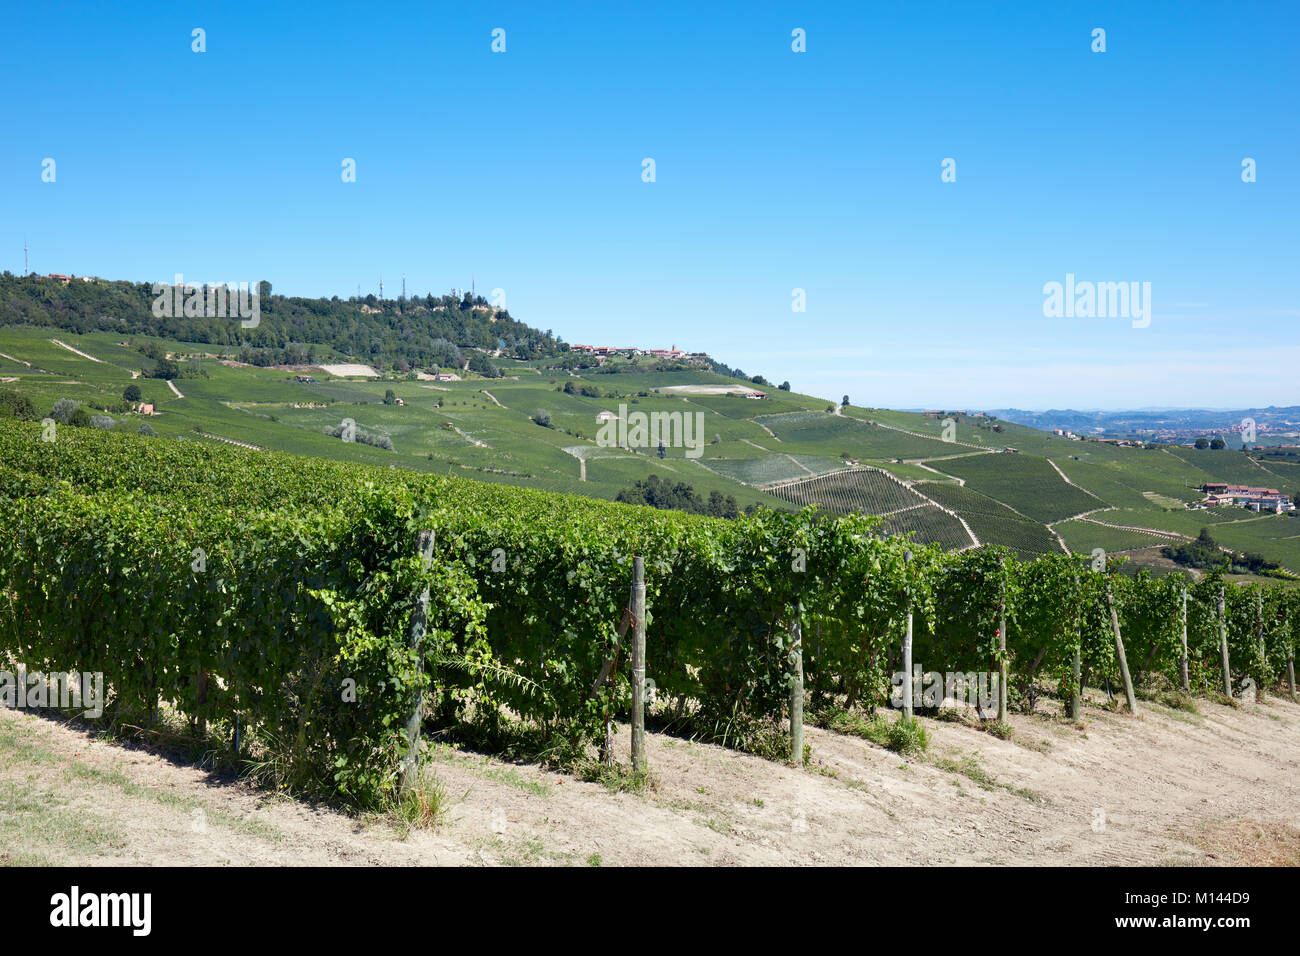 Green vineyards and Langhe hills in Italy, blue sky Stock Photo